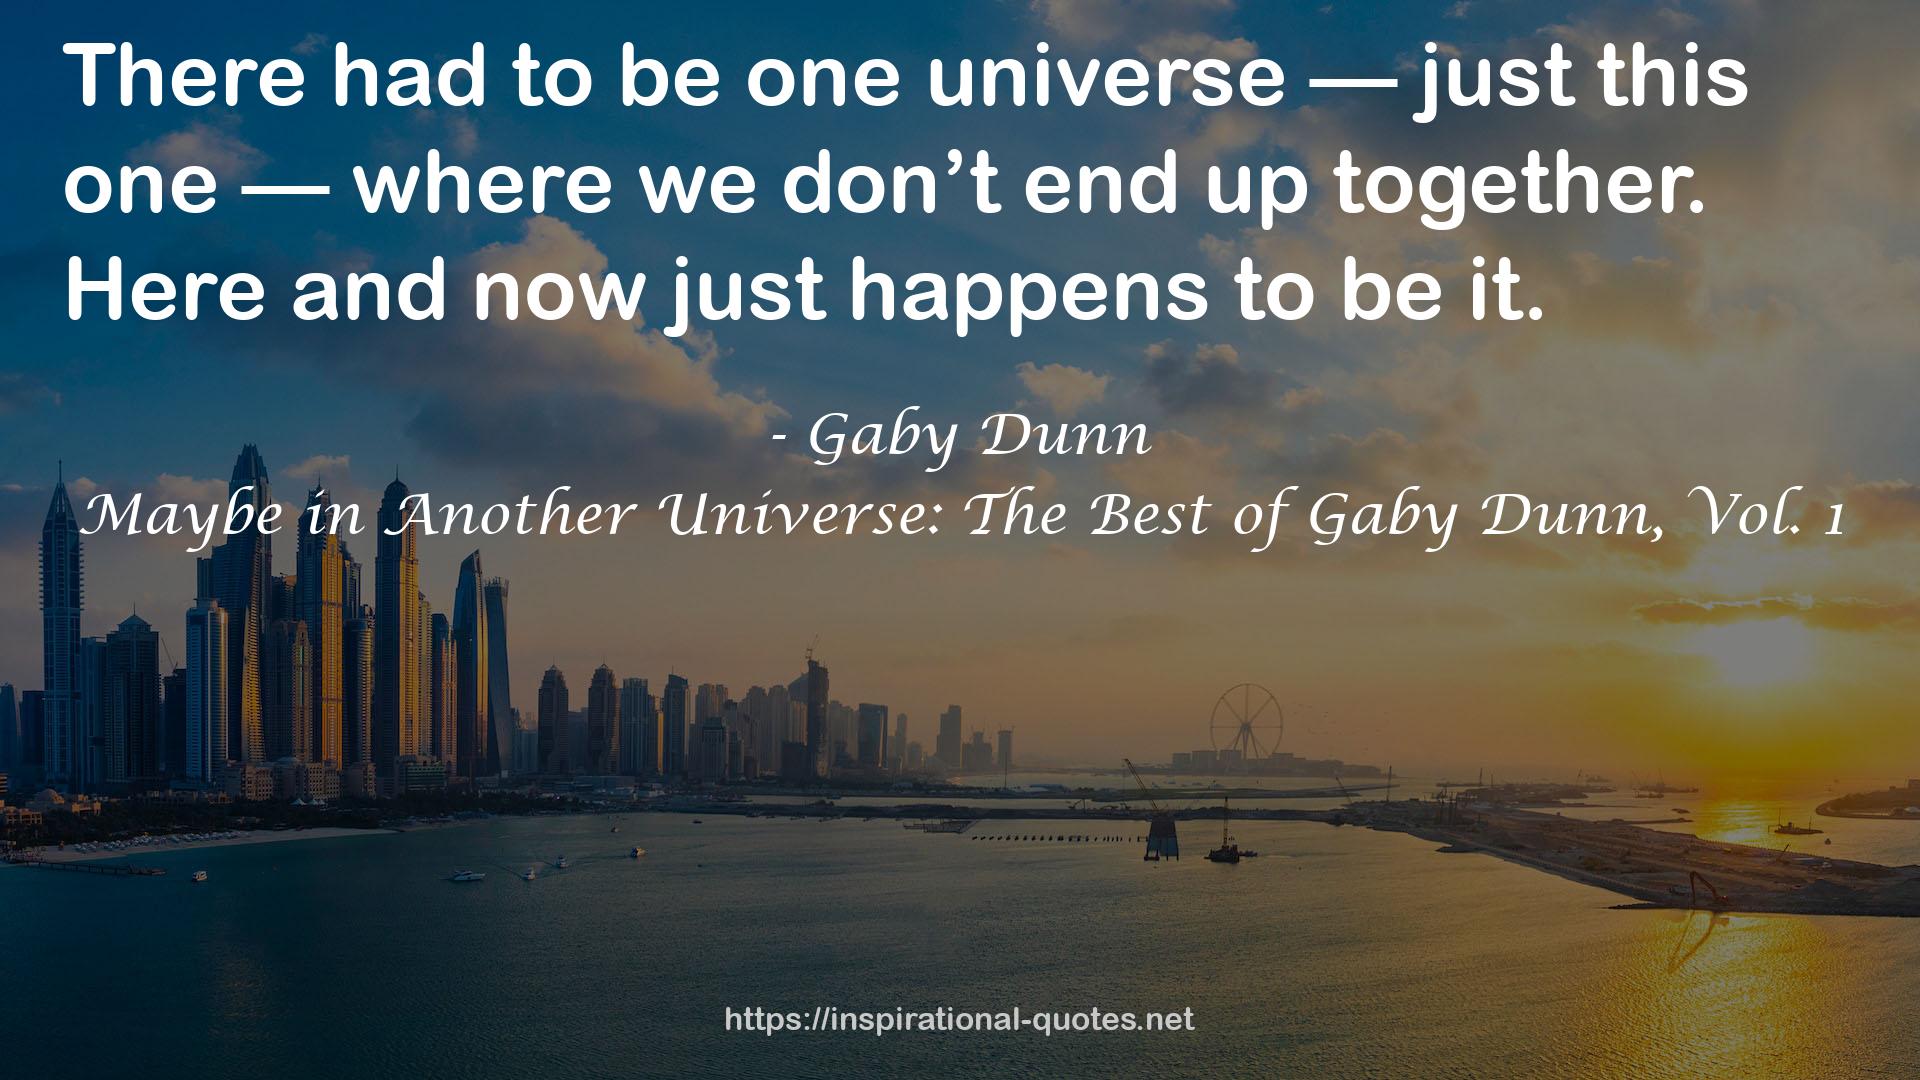 Maybe in Another Universe: The Best of Gaby Dunn, Vol. 1 QUOTES